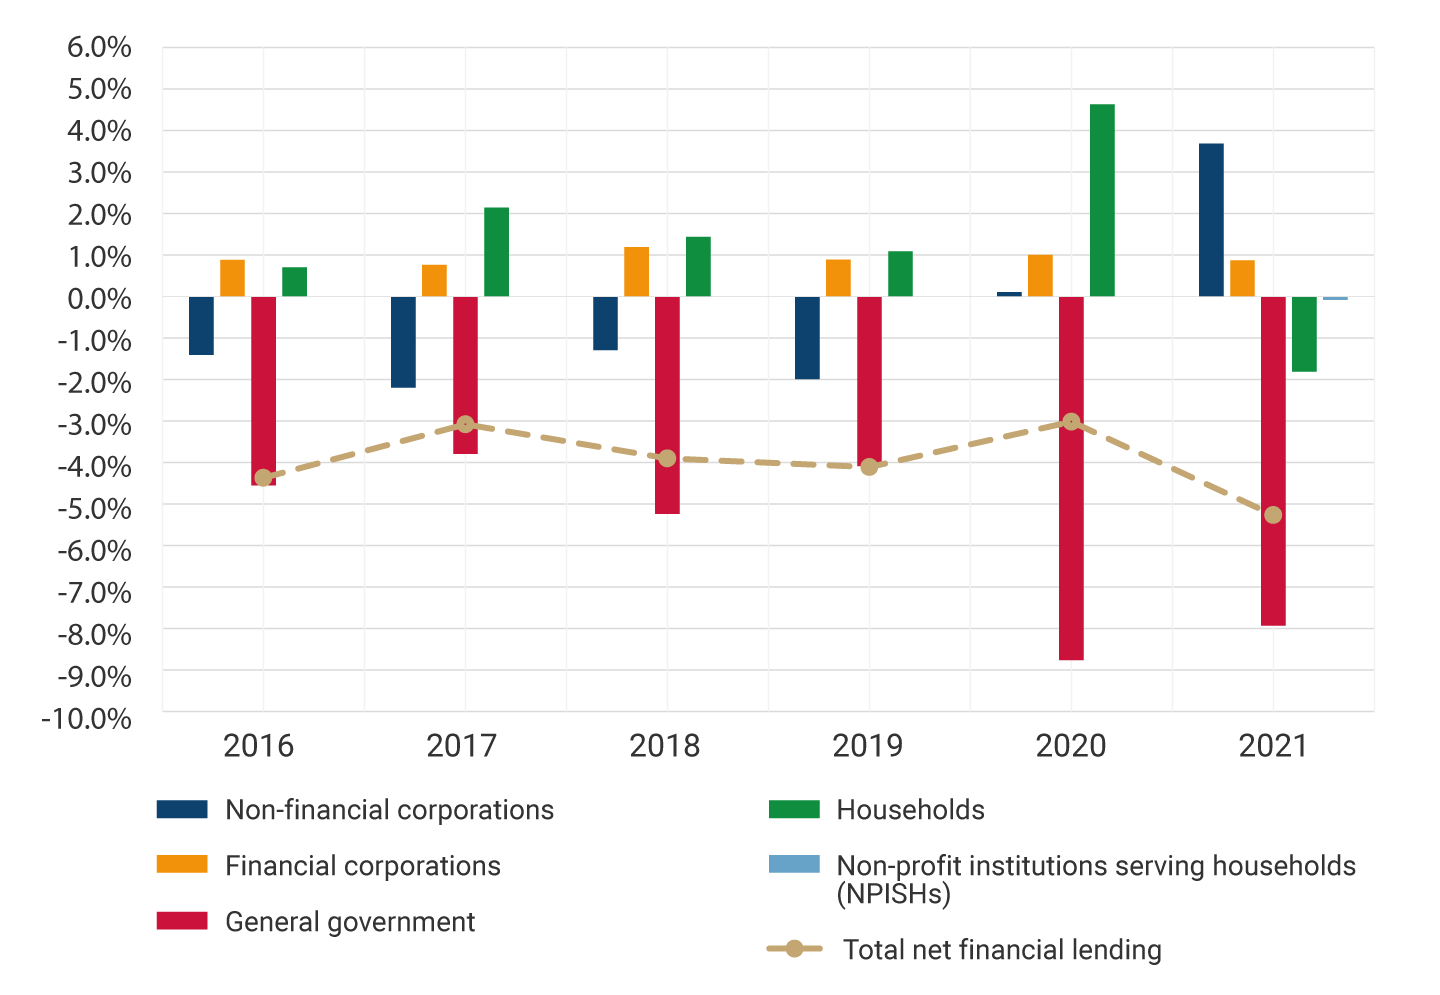 The graph shows the evolution between 2016 and 2021 of the annual financial balances as a percentage of nominal GDP of: non-financial corporations, financial corporations, general government, households, non-profit institutions serving households, and total financial net lending. For the year 2020, the decrease in the financial balance of the general government stands out to -8.8%, and an increase in the financial balance of households to 4.6%. For 2021, the financial balance of non-financial corporations shows a positive value of 3.7%; the balance of the general government was -7.9%, while that of households decreased to negative values up to -1.8%.